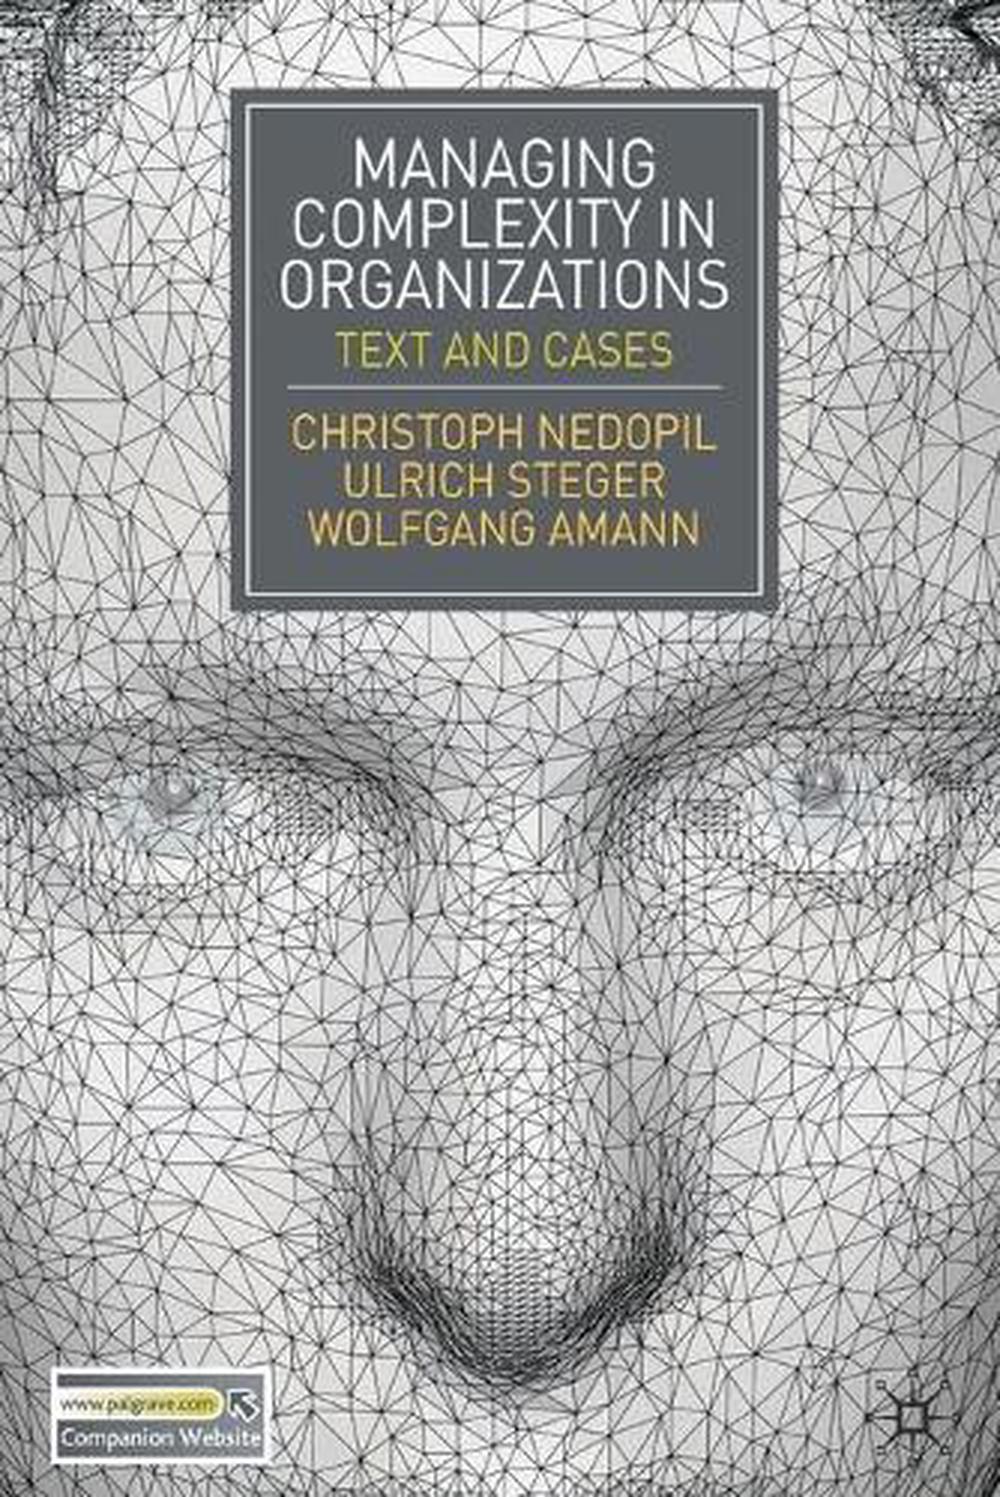 Managing Complexity in Organizations Text and Cases by Christoph Nedopil (Engli 9780230252912